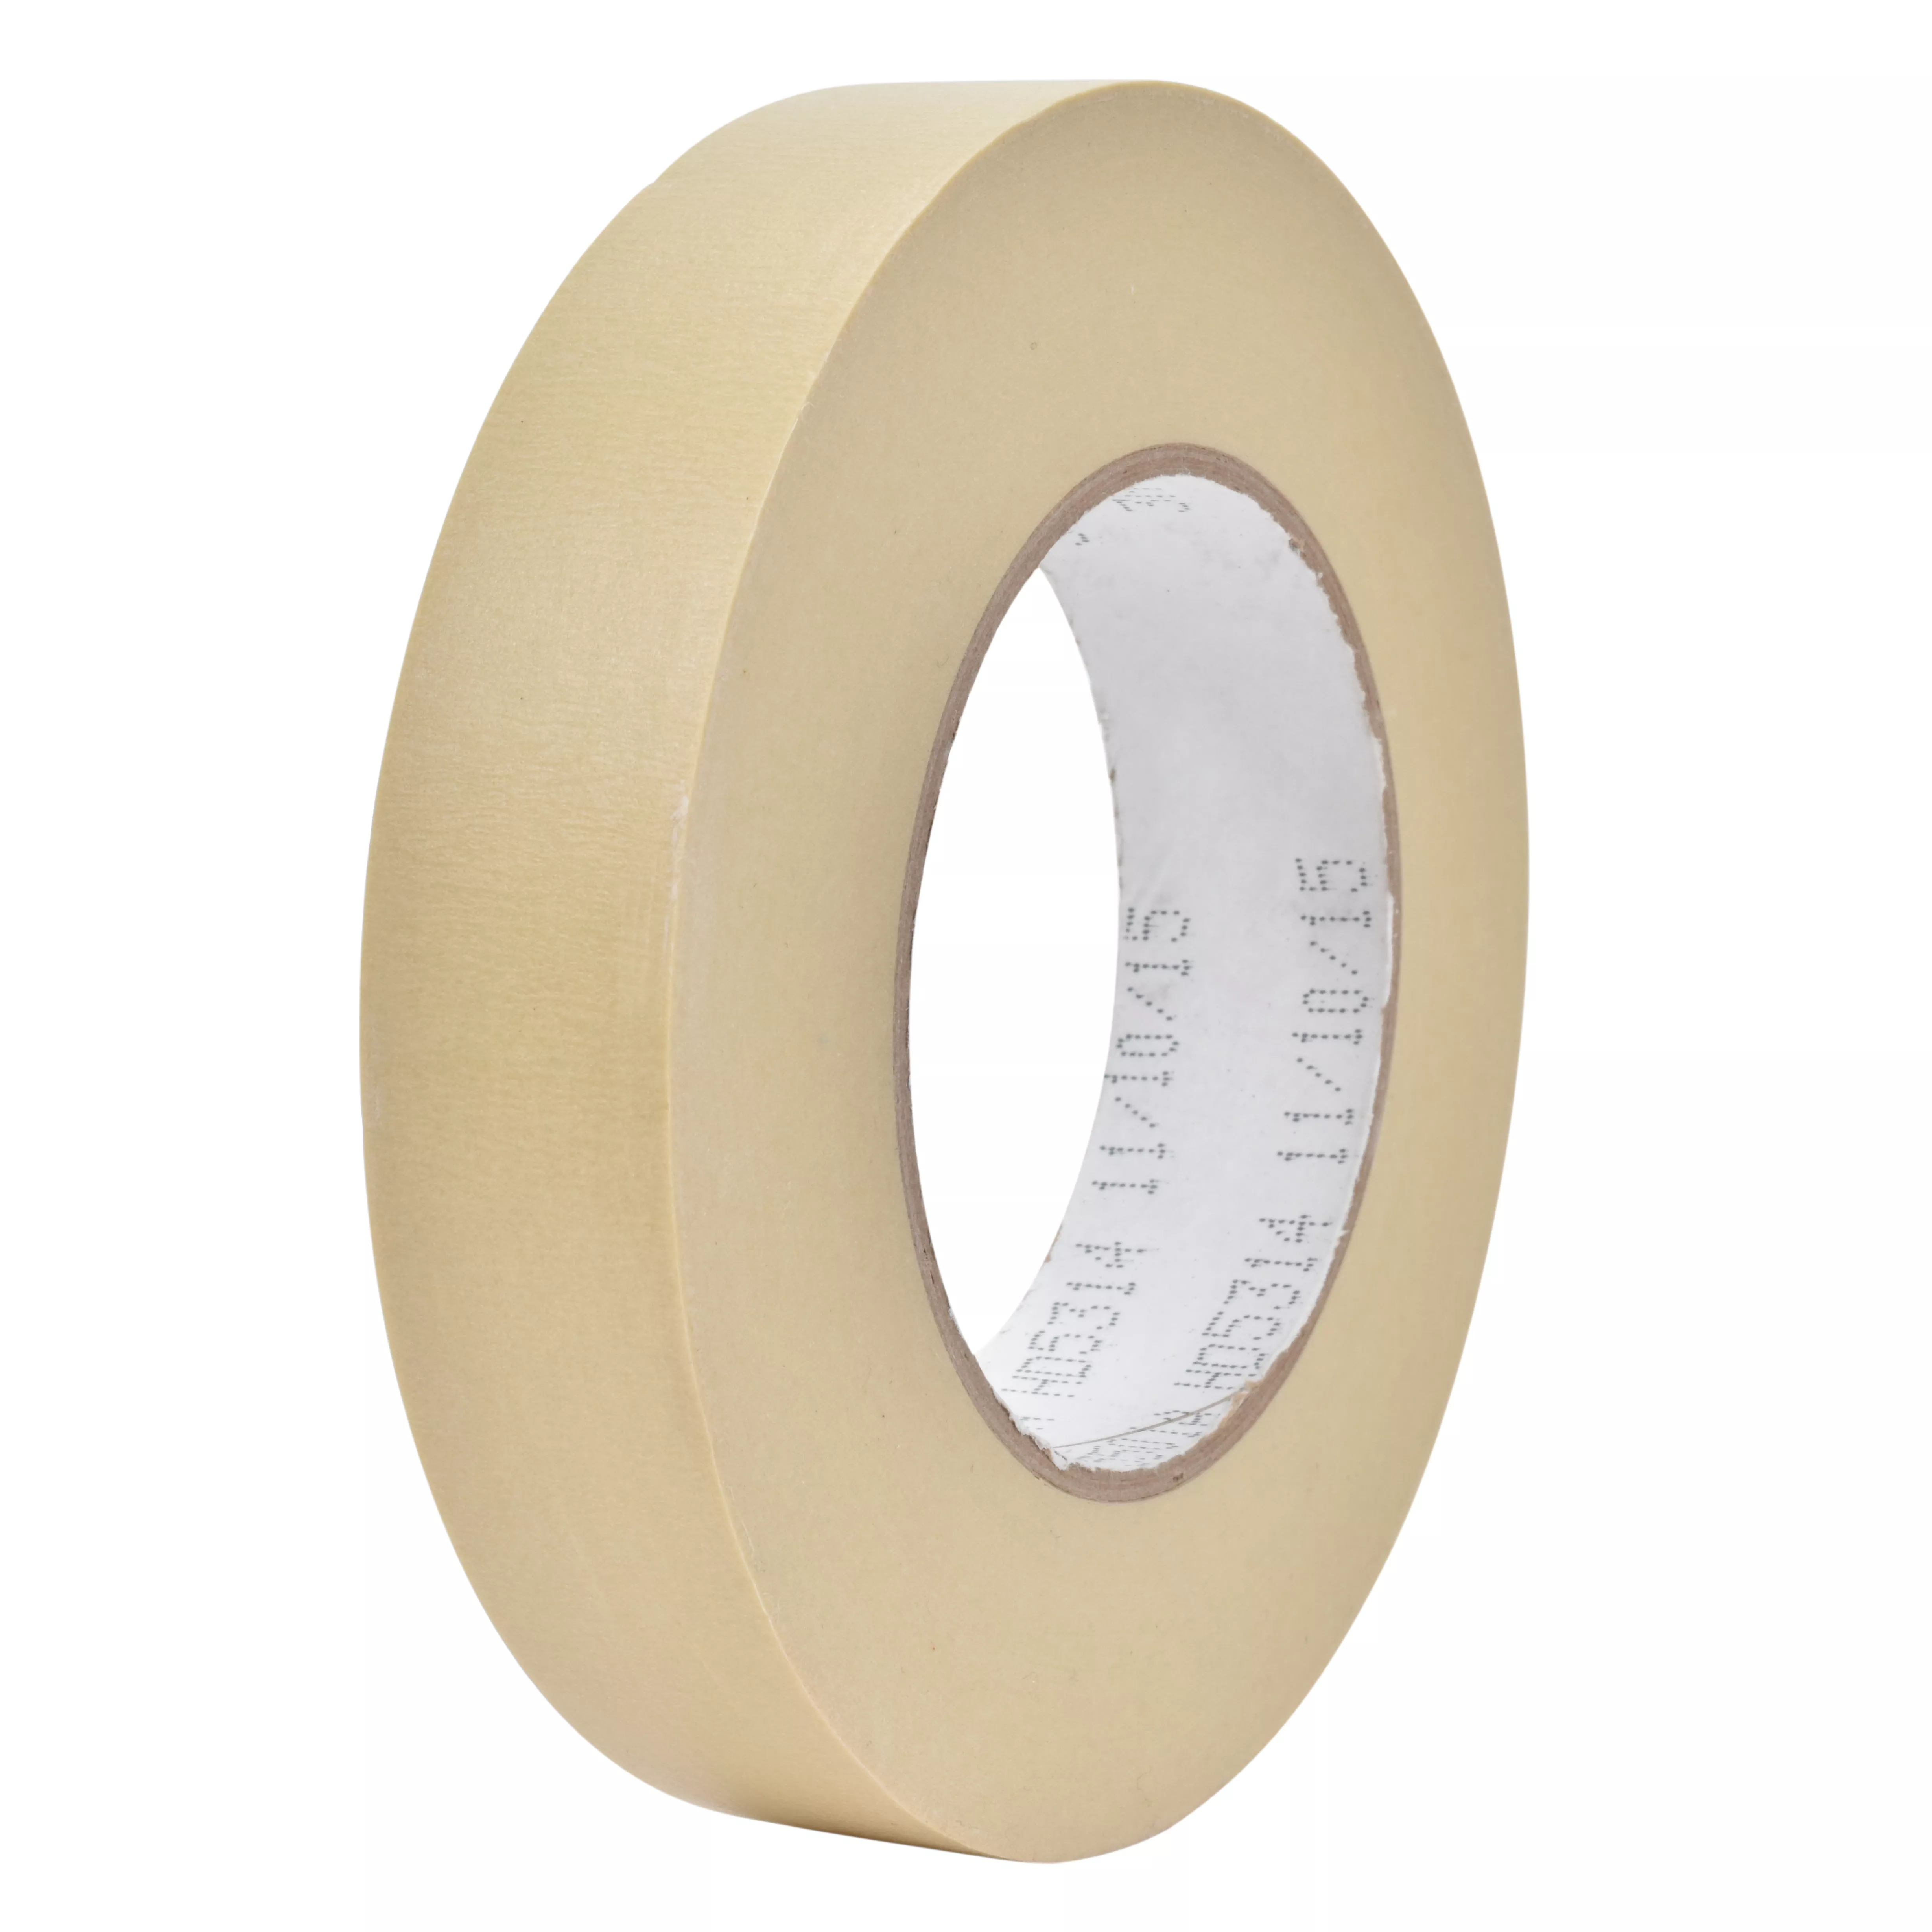 3M™ Specialty High Temperature Masking Tape 5501A, Tan, 1/4 in x 60 yd,
192/Case, Restricted